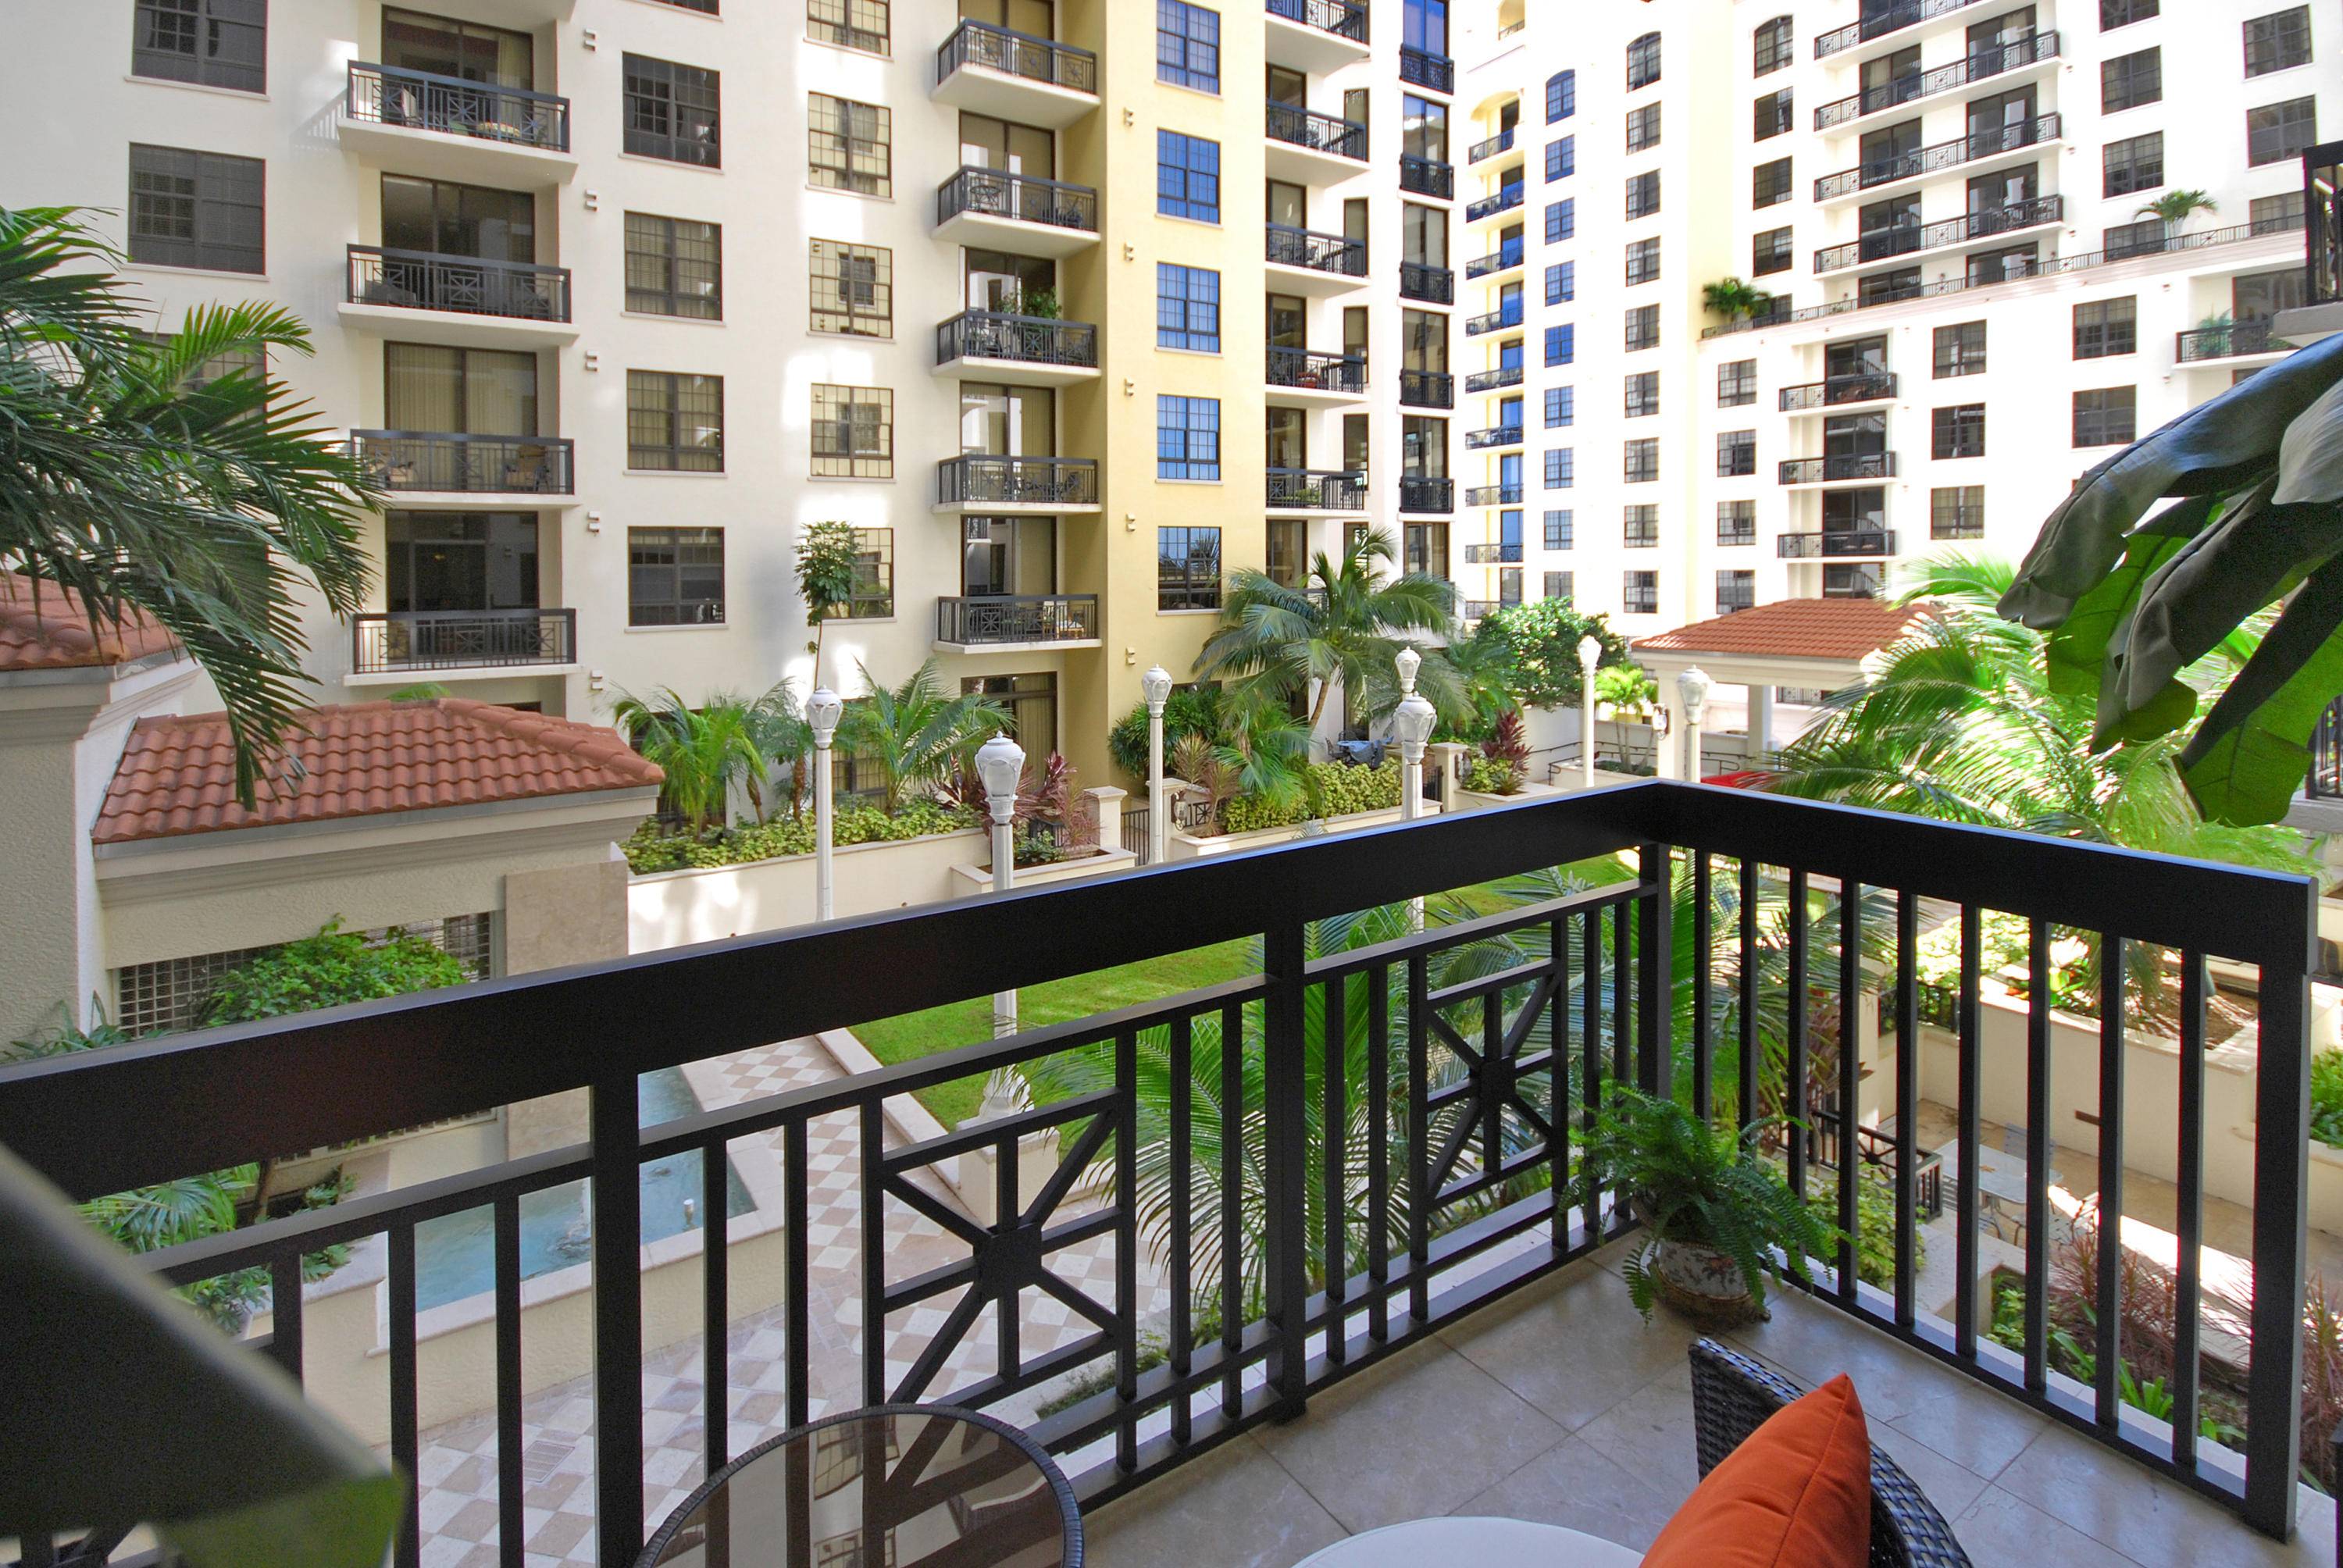 Wonderful downtown WPB courtyard and garden view unit overlooking the fountains and palm trees.